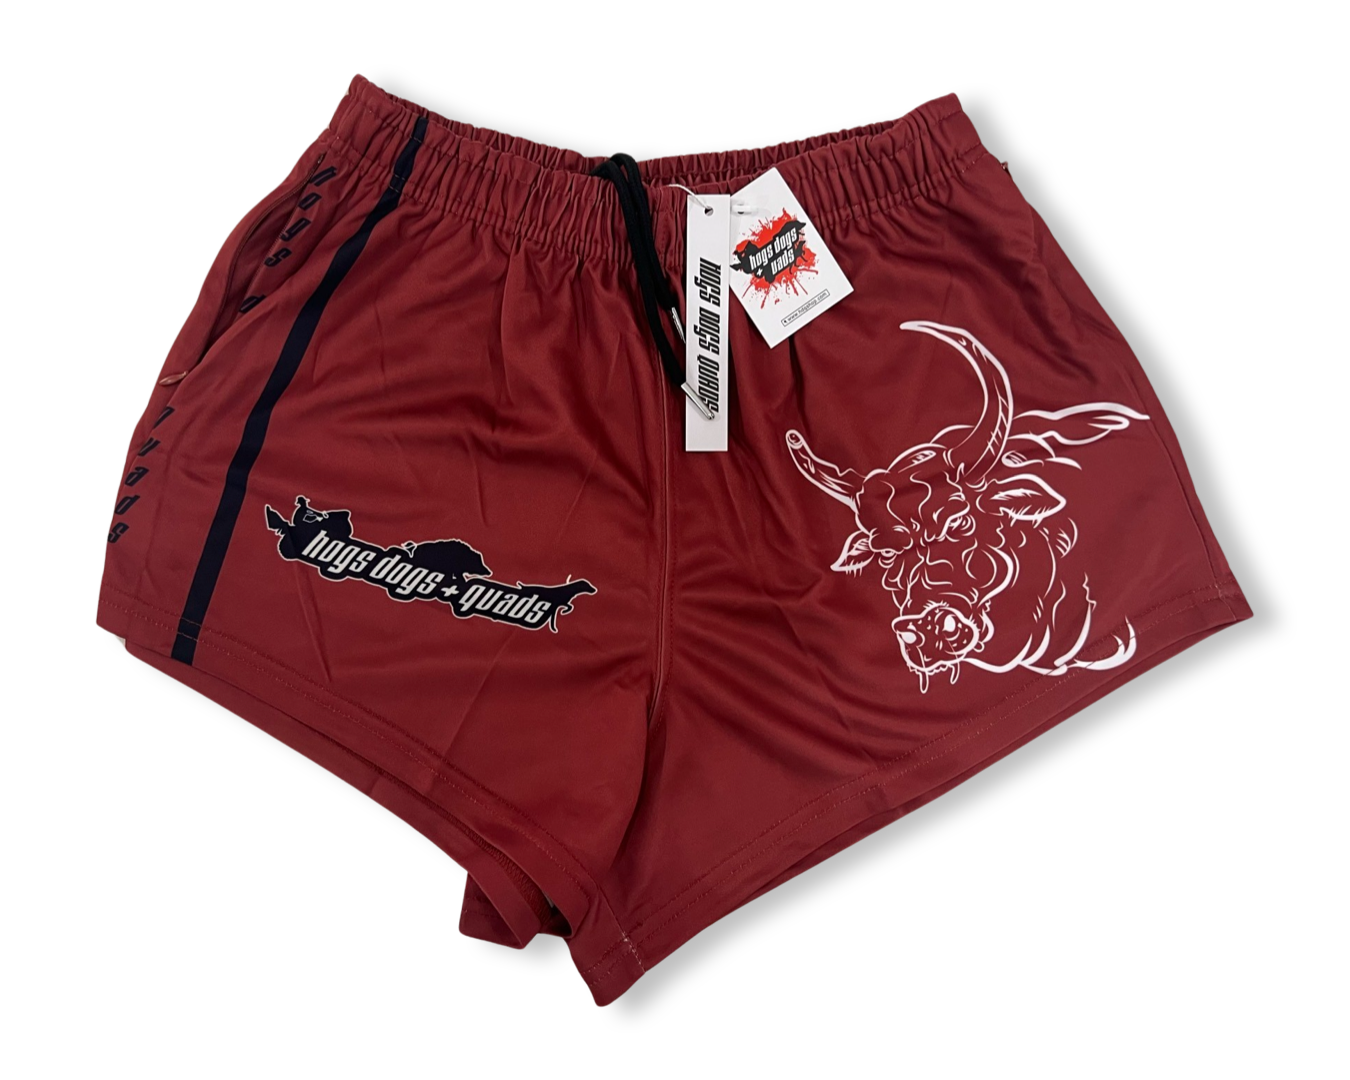 Footy Shorts ZIP UP POCKETS - Hogs Dogs Quads Shop